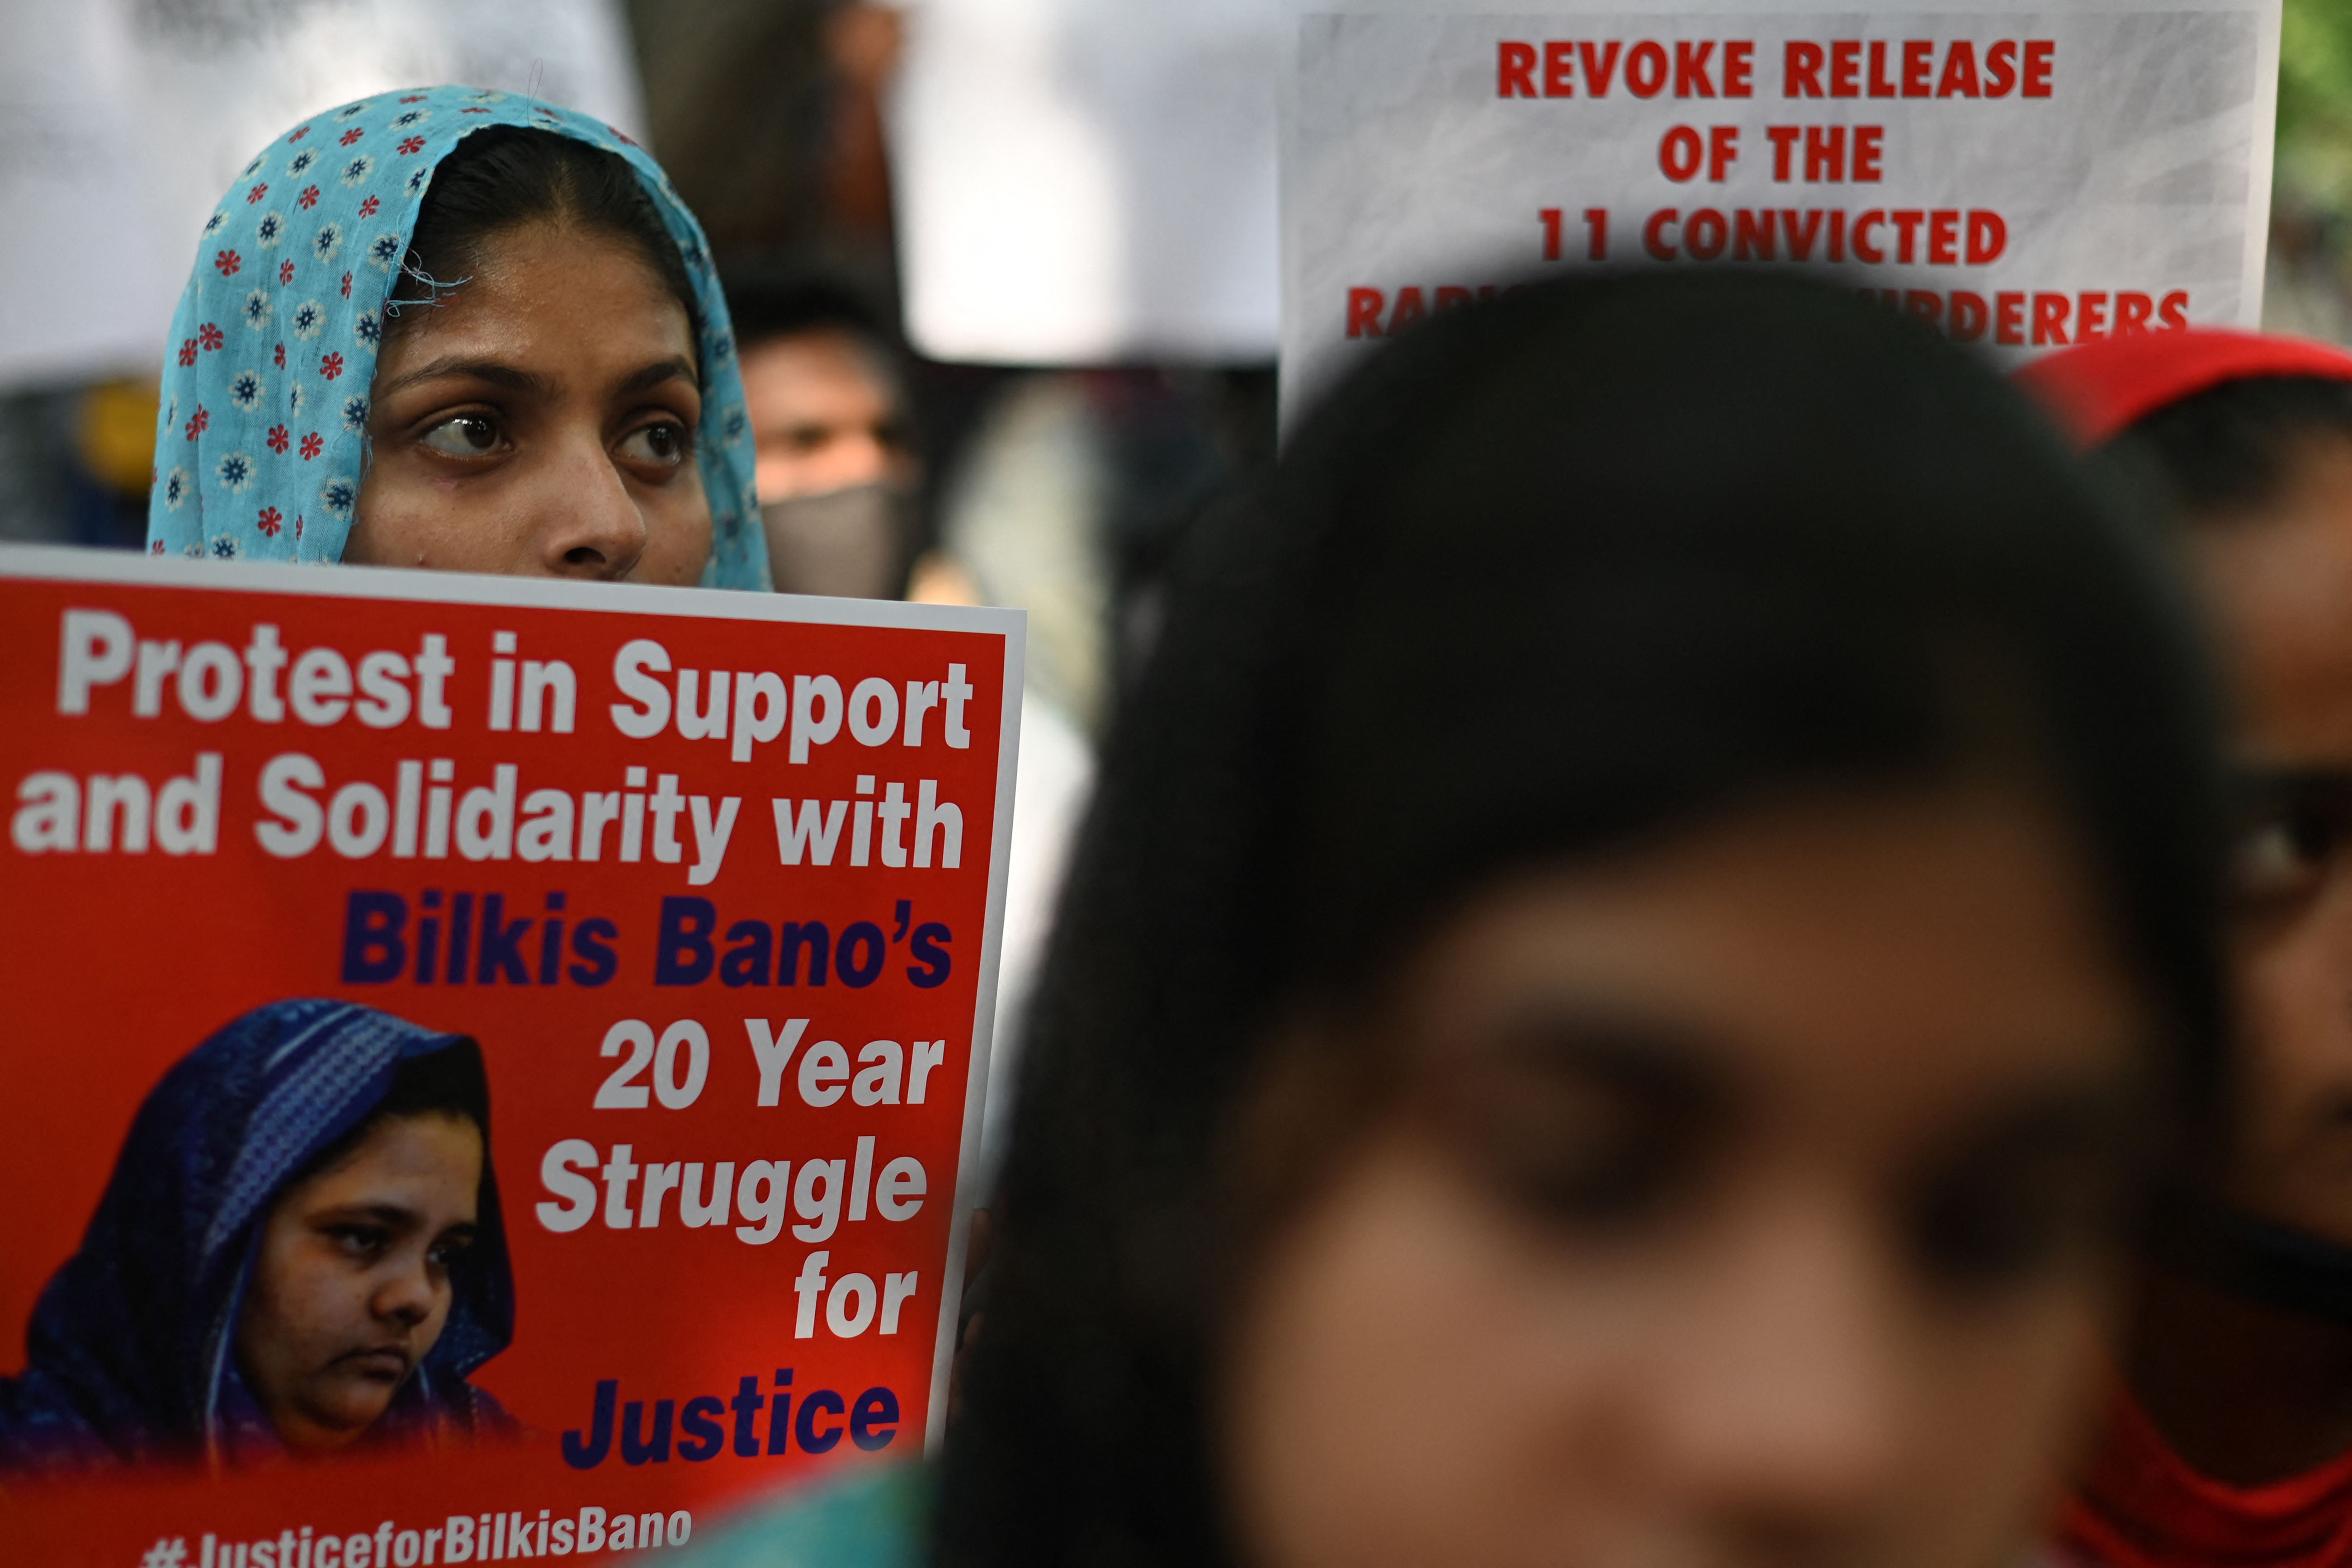 File. Demonstrators hold placards during a protest against the release of men convicted of gang-raping of Bilkis Bano during the 2002 communal riots in Gujarat, in New Delhi on 27 August 2022